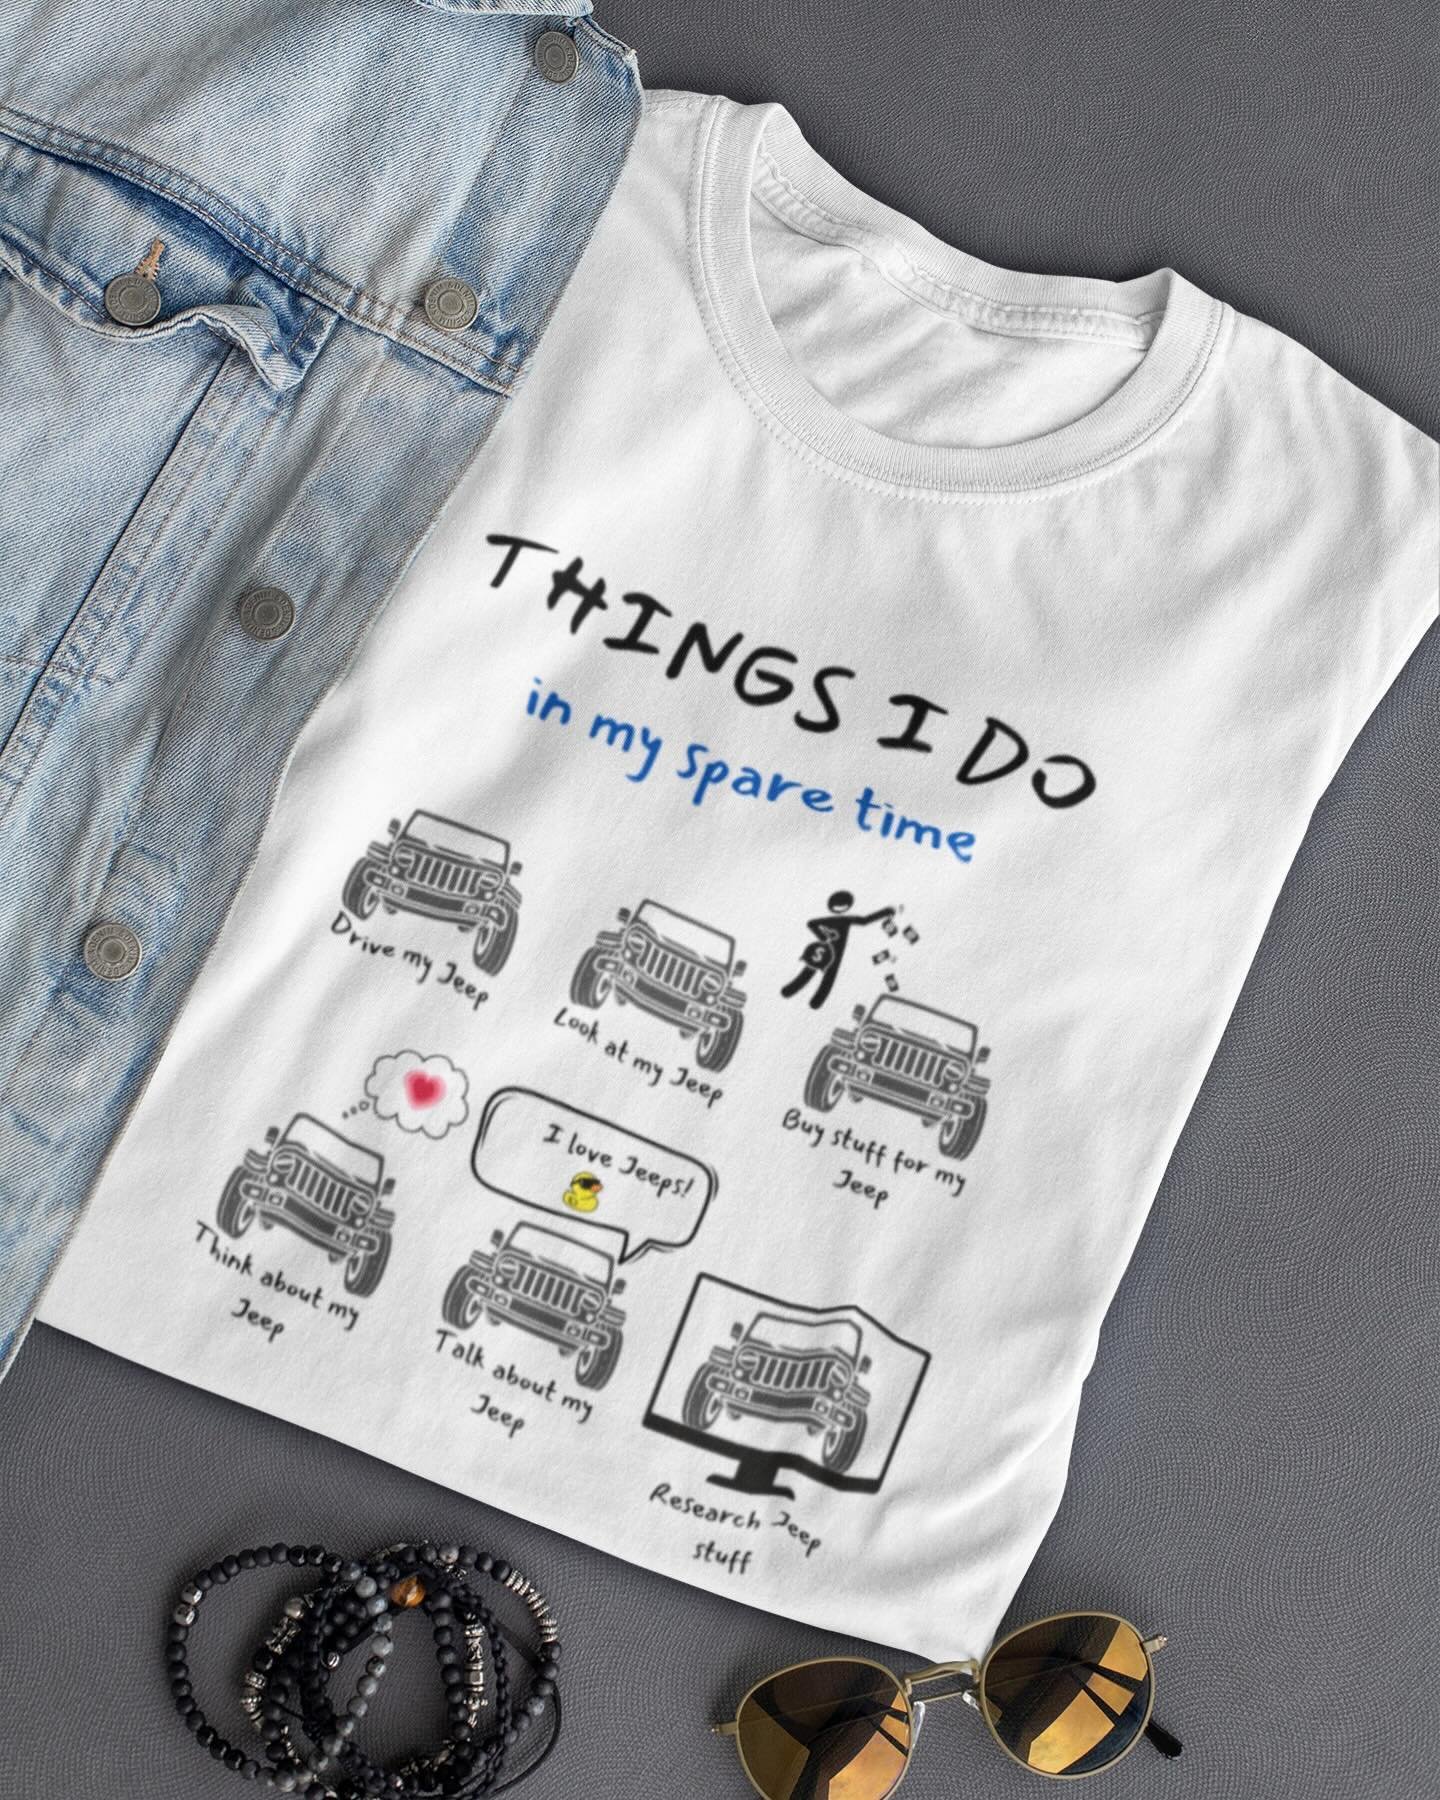 #itsajeepthing #yall check out our latest #sparetime #tee your gonna #love it #linkinbio #mopar #4x4 #getoutside #instagood #camping #instagram #overlanding #freedom #familygoals #vet #smallbusiness #etsysellersofinstagram #freshair #nature #etsyfind